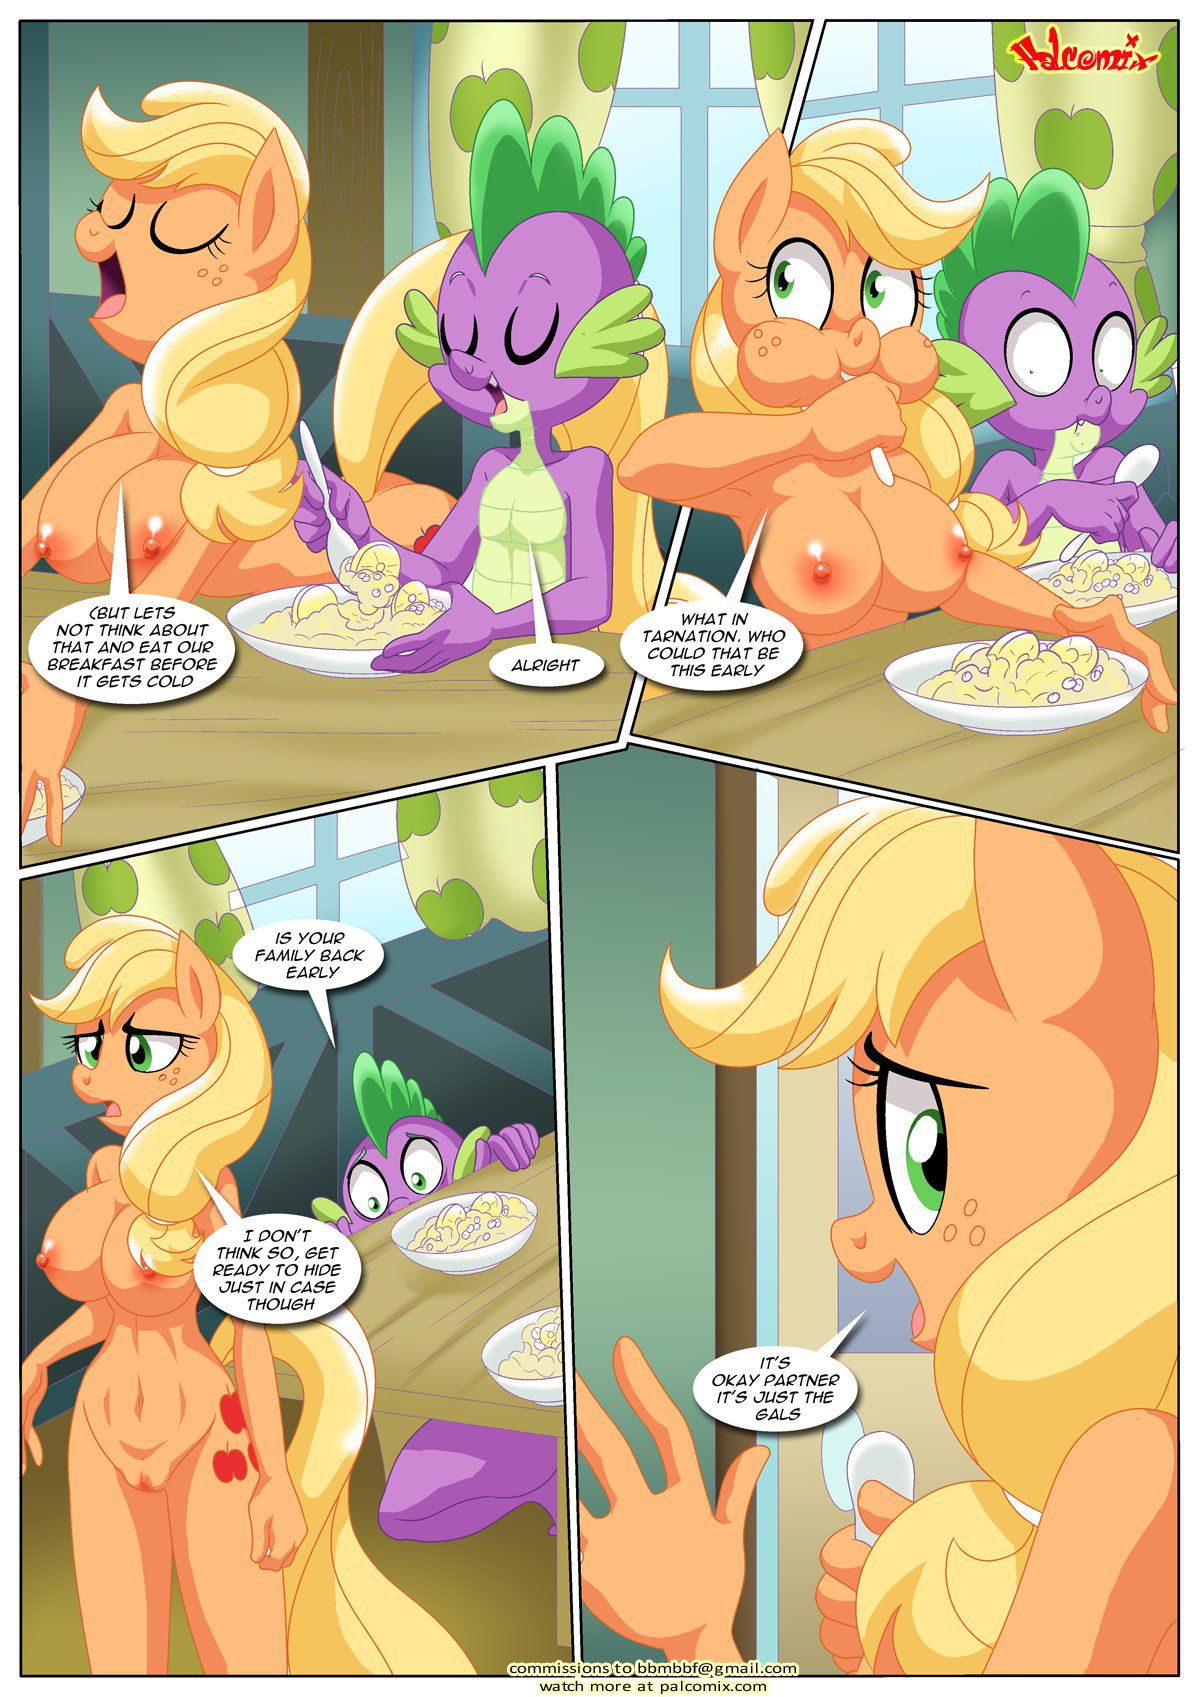 [Palcomix] Pinkie's Playhouse (My Little Pony Friendship Is Magic) [Ongoing] 8